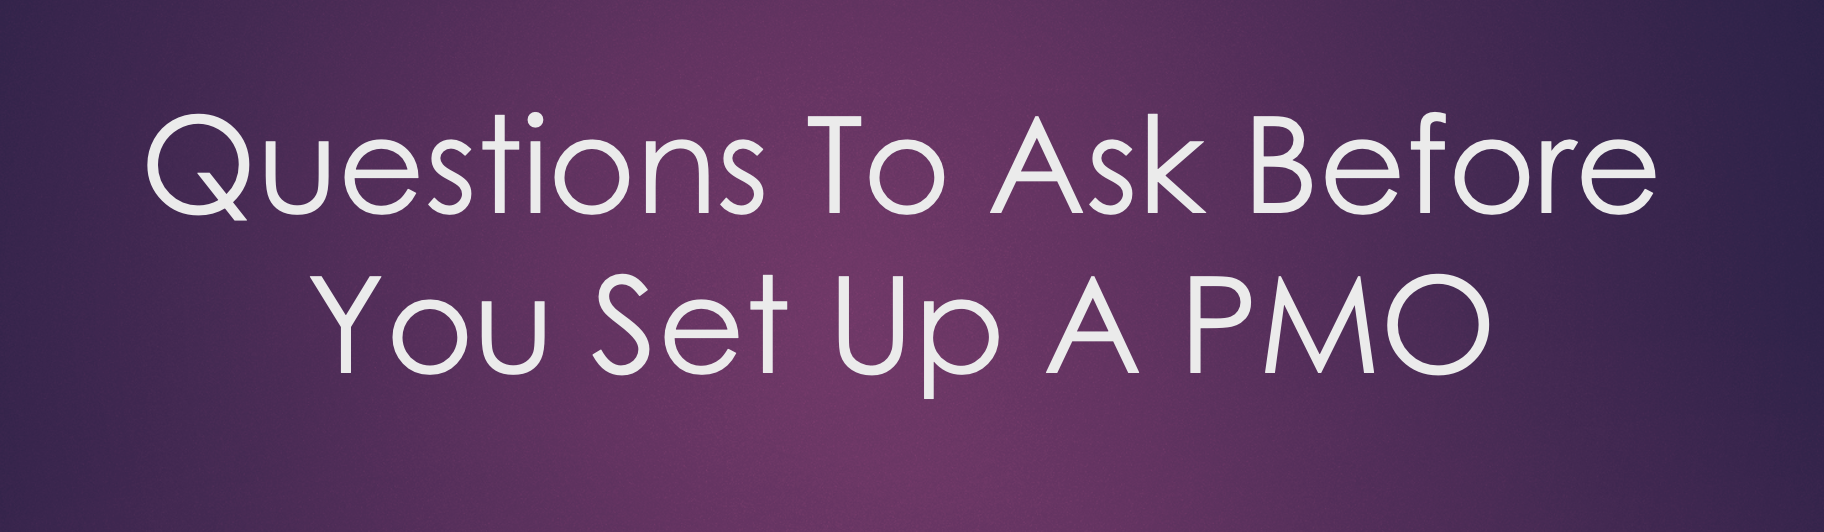 Questions To Ask Before You Set Up A PMO